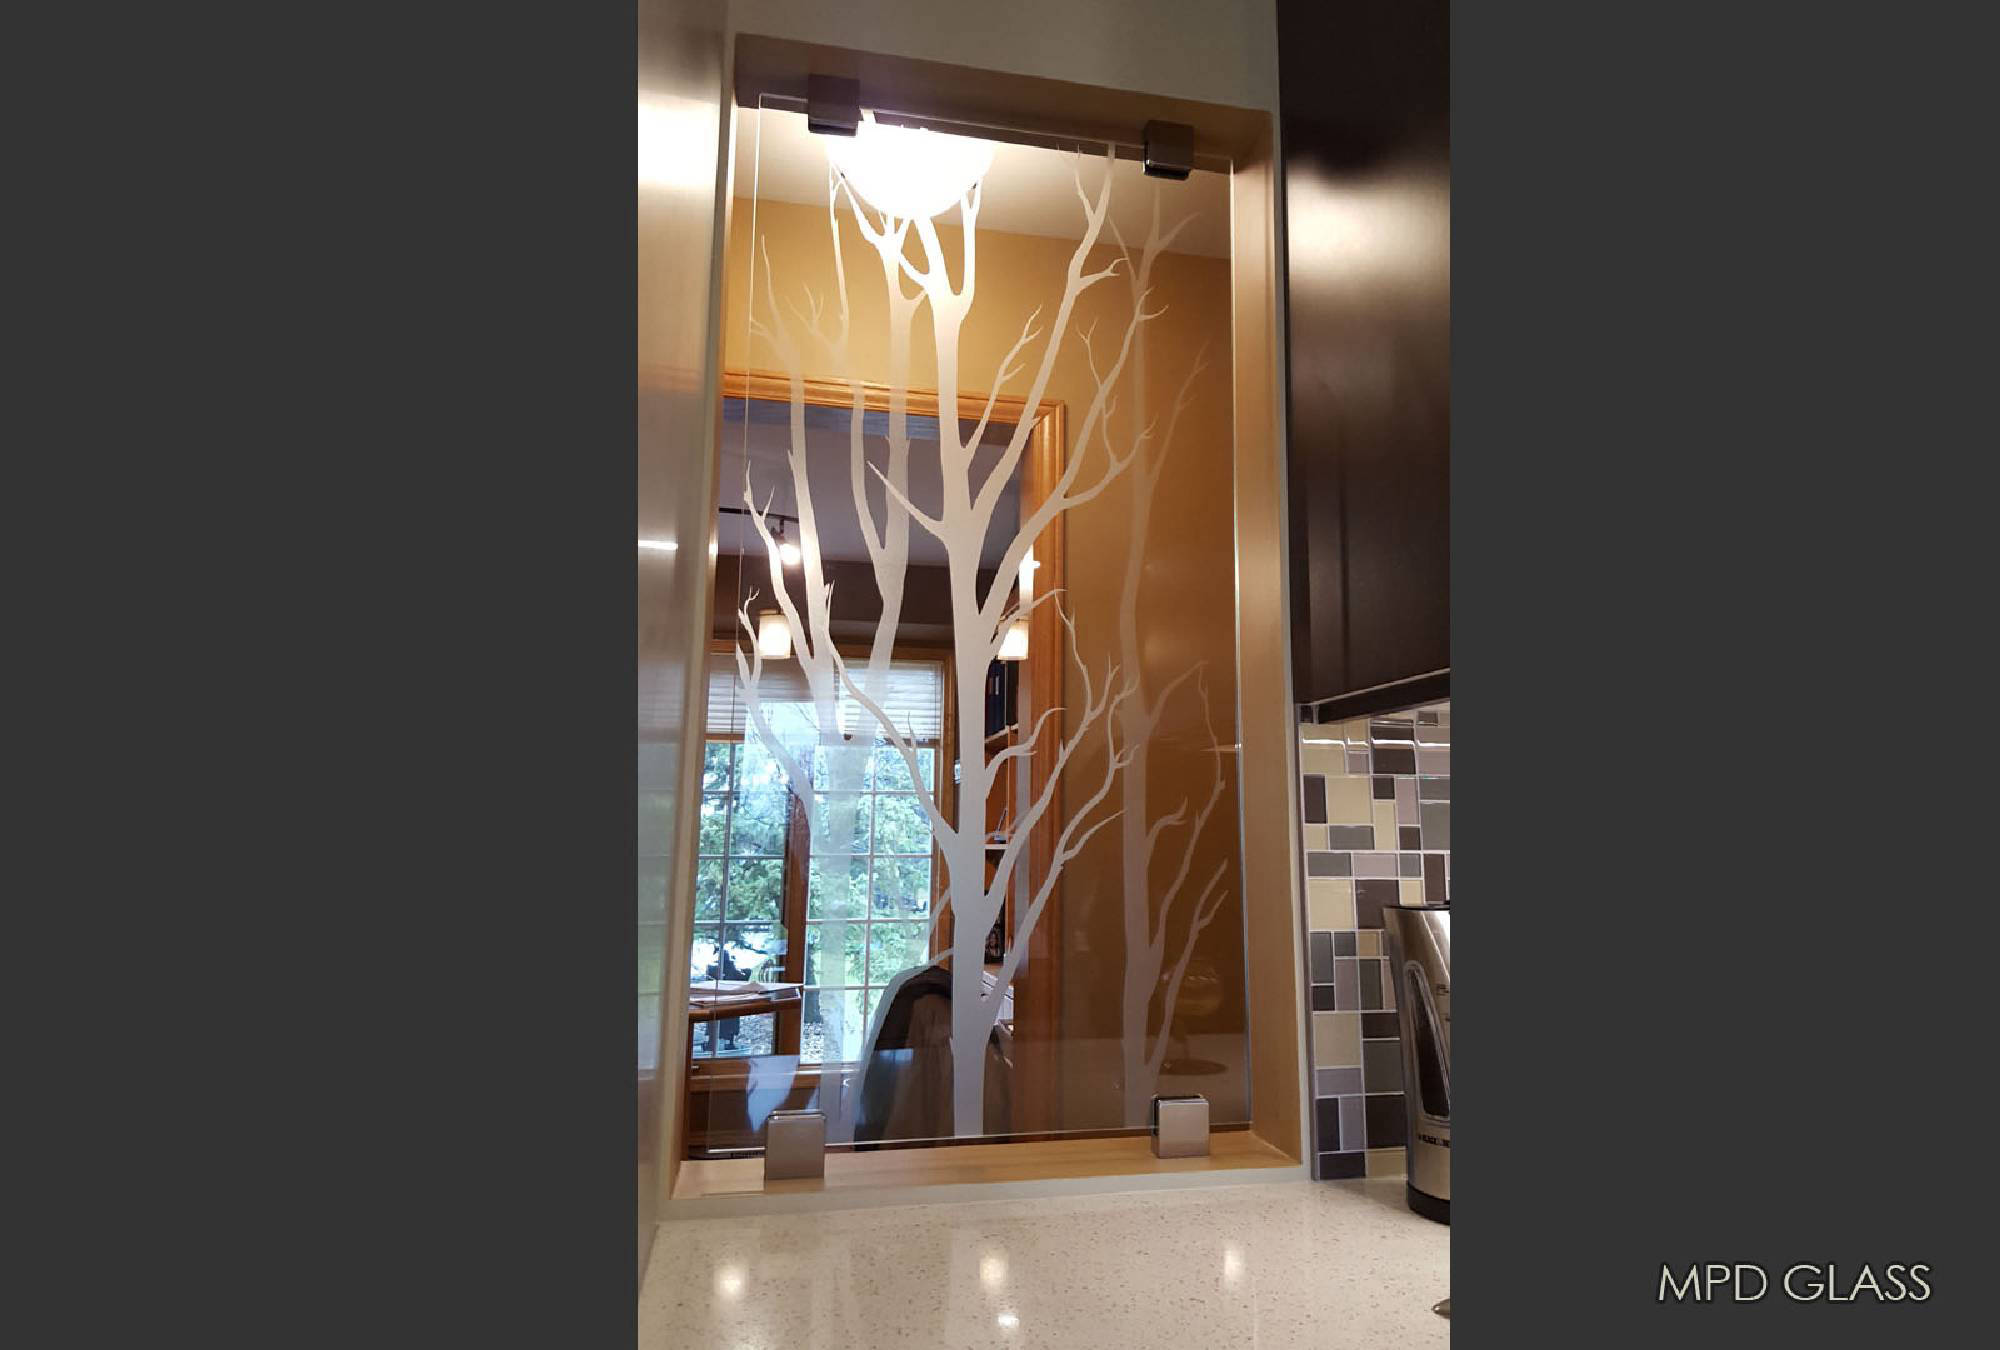  Small kitchen divider with etched tree design